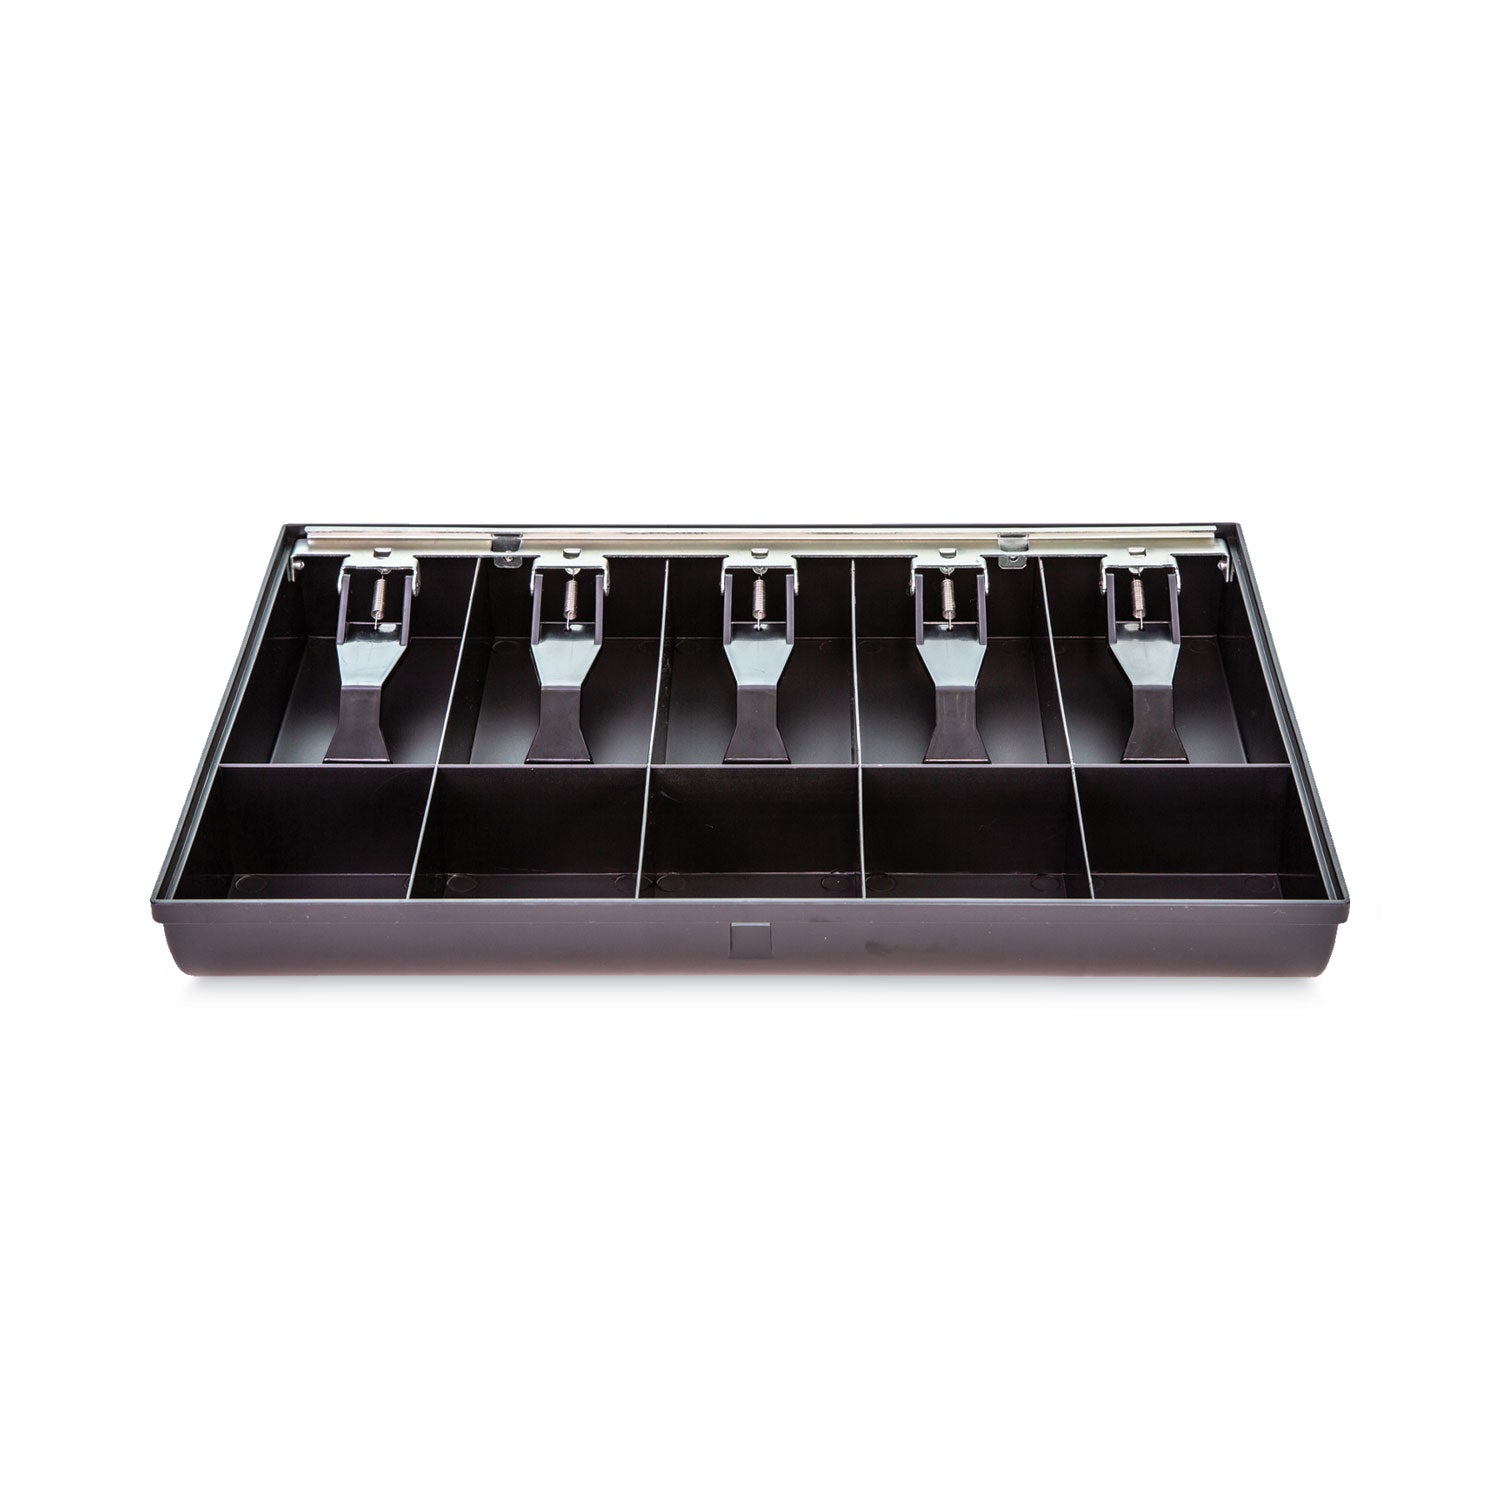 plastic-currency-and-coin-tray-coin-cash-10-compartments-16-x-1125-x-225-black_cnk500063 - 4